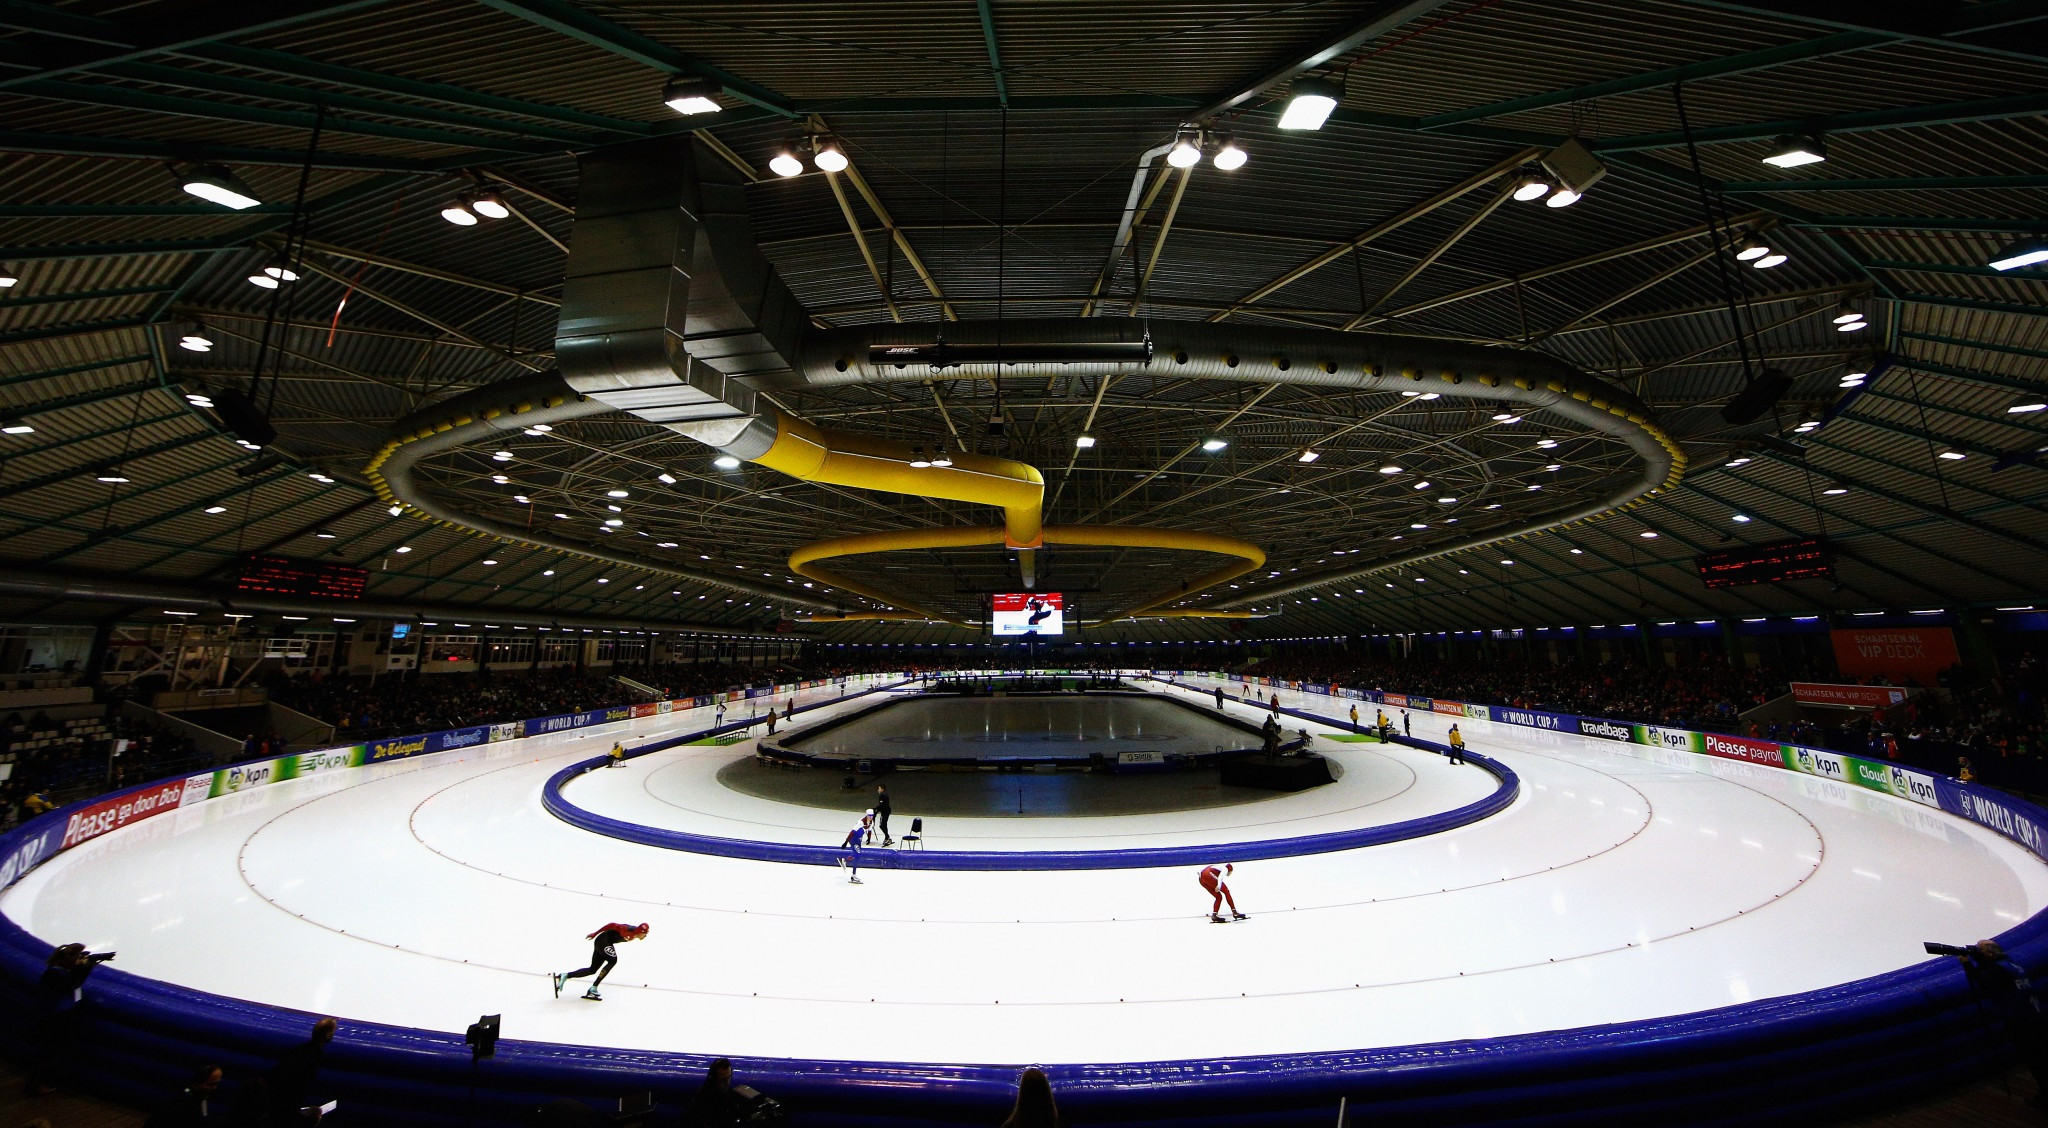 ISU Council approves Heerenveen as speed skating hub for 2021 World Cup legs